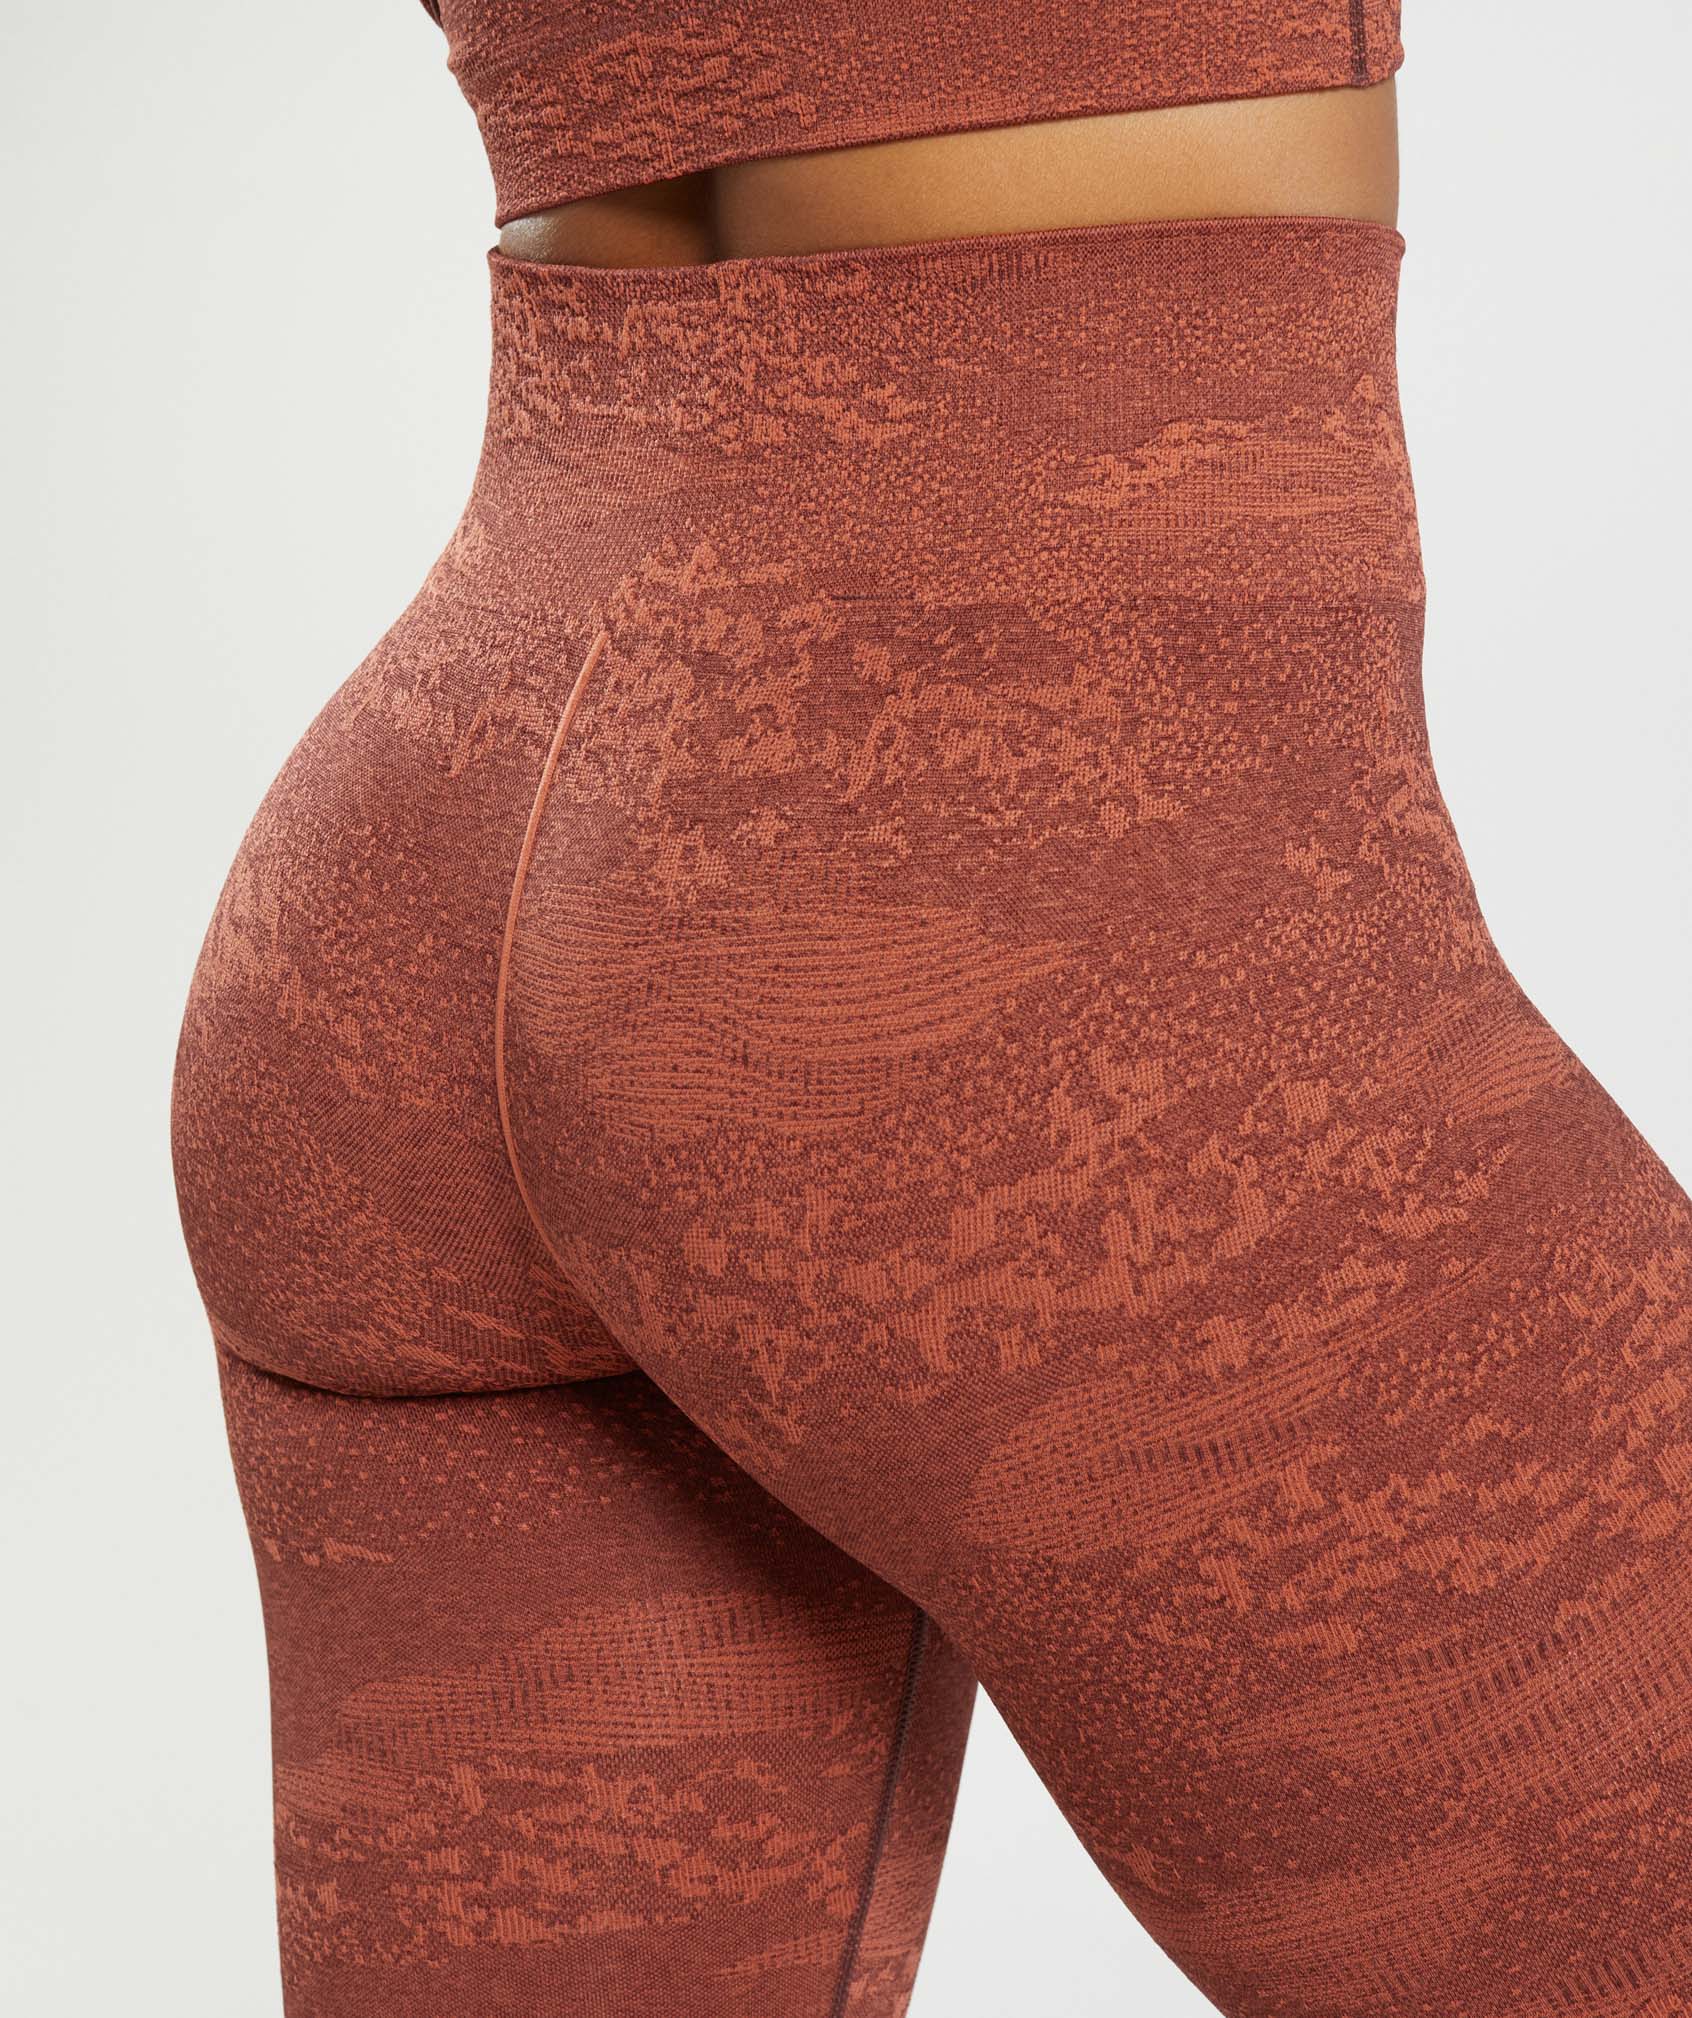 Adapt Camo Seamless Leggings in Storm Red/Cherry Brown